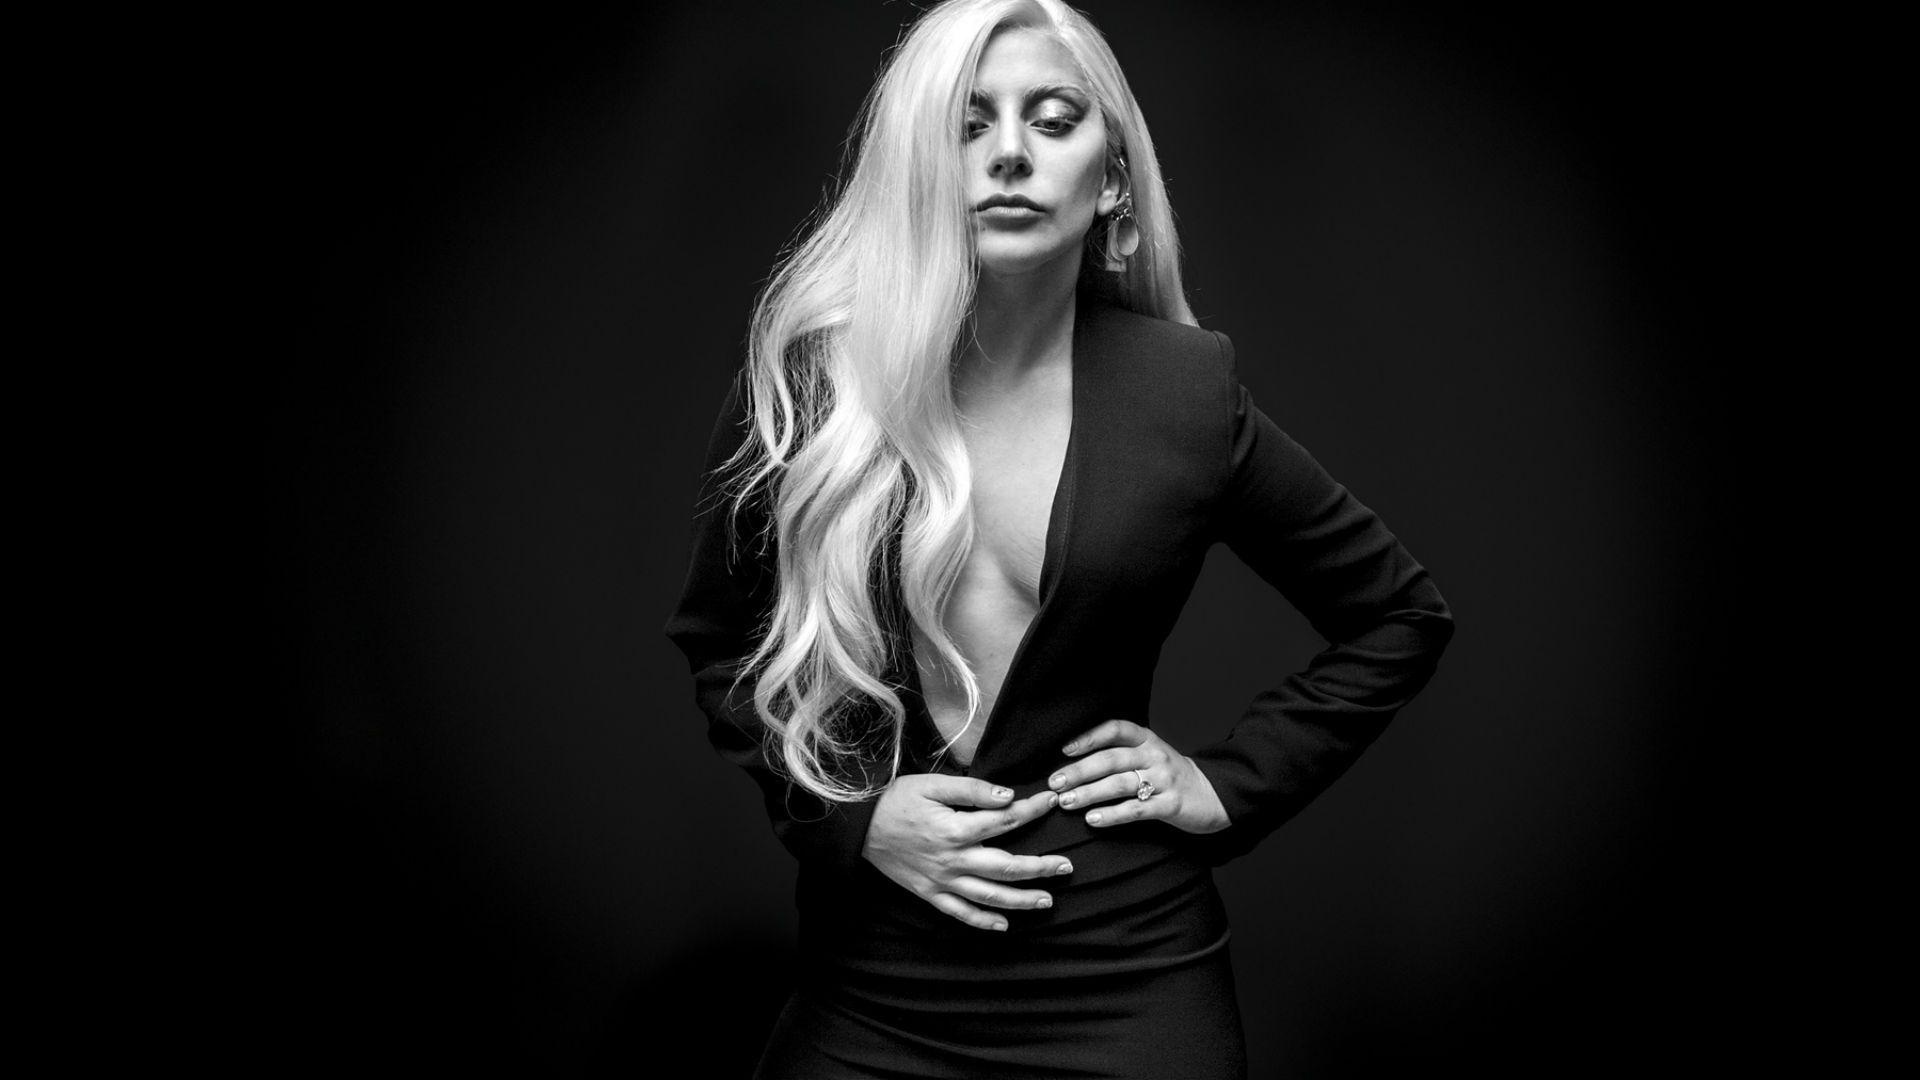 Lady Gaga Wallpaper (Picture)